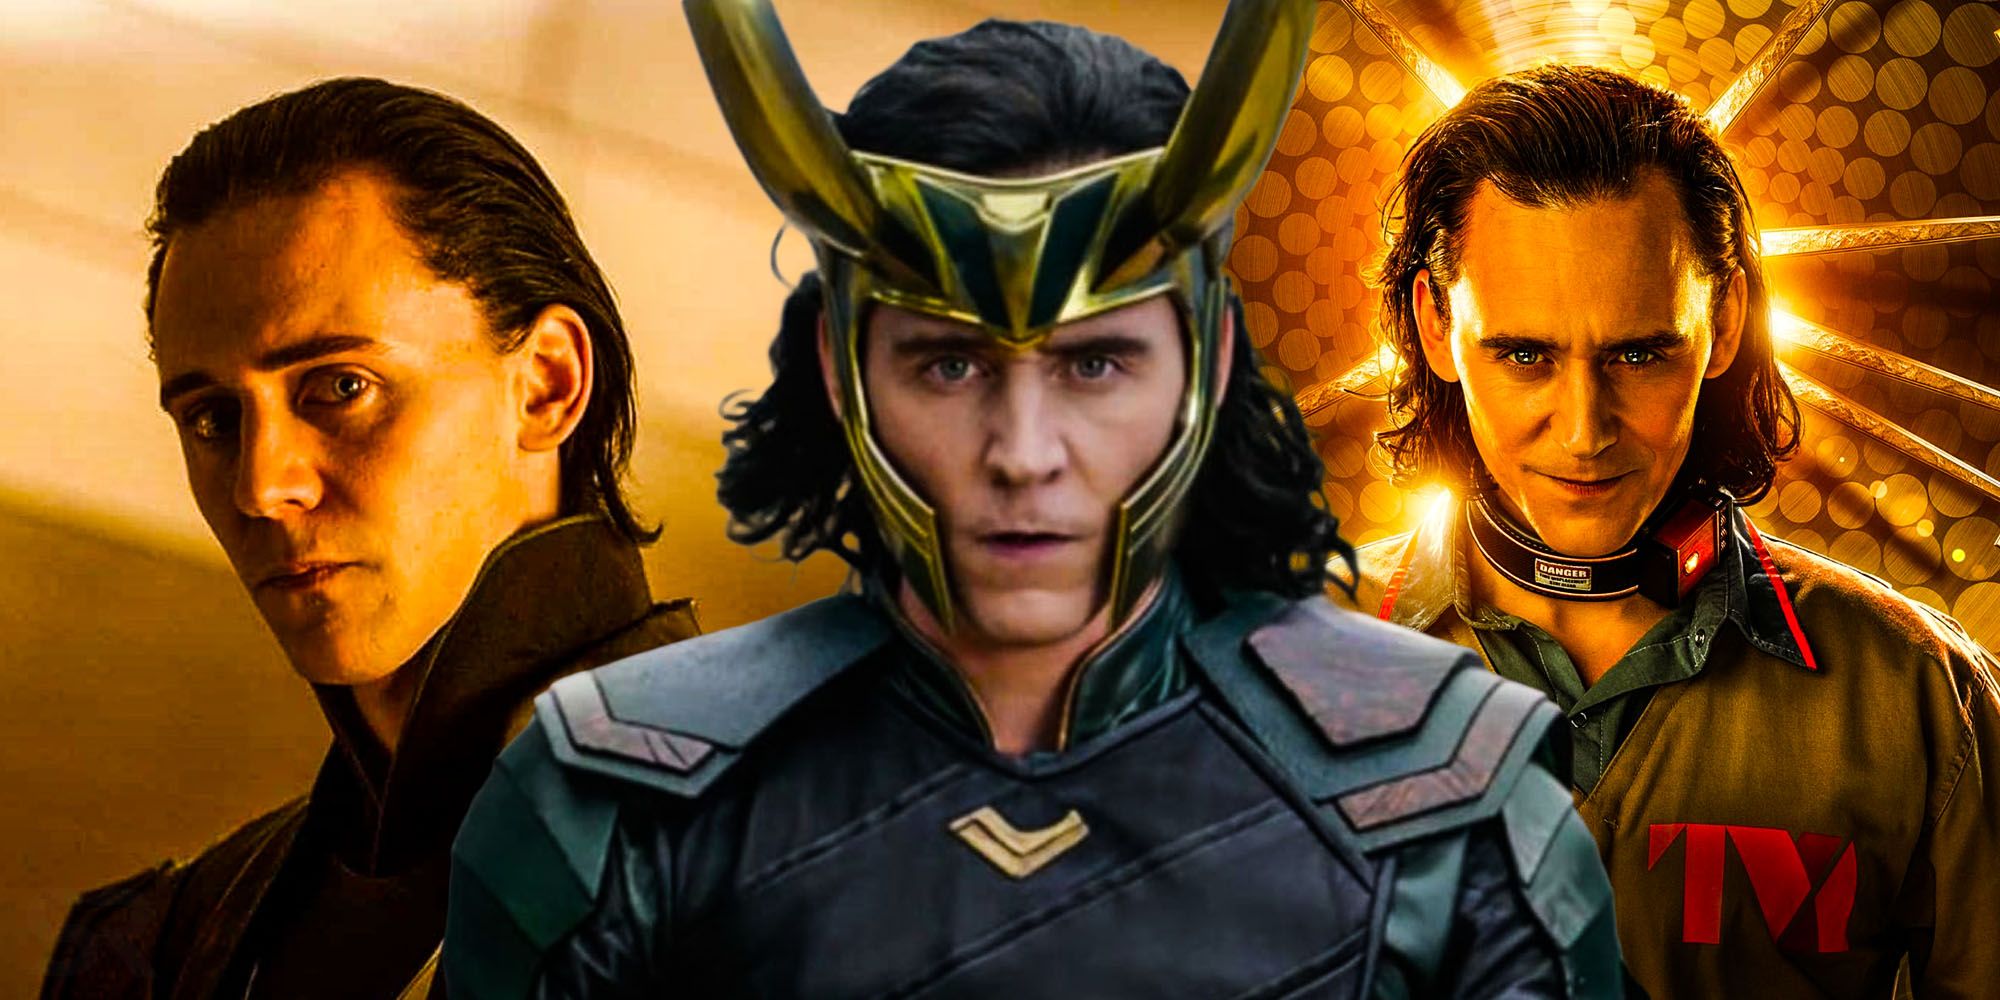 Loki’s OB Was Almost A Variant Of Another MCU Character According To New Concept Art